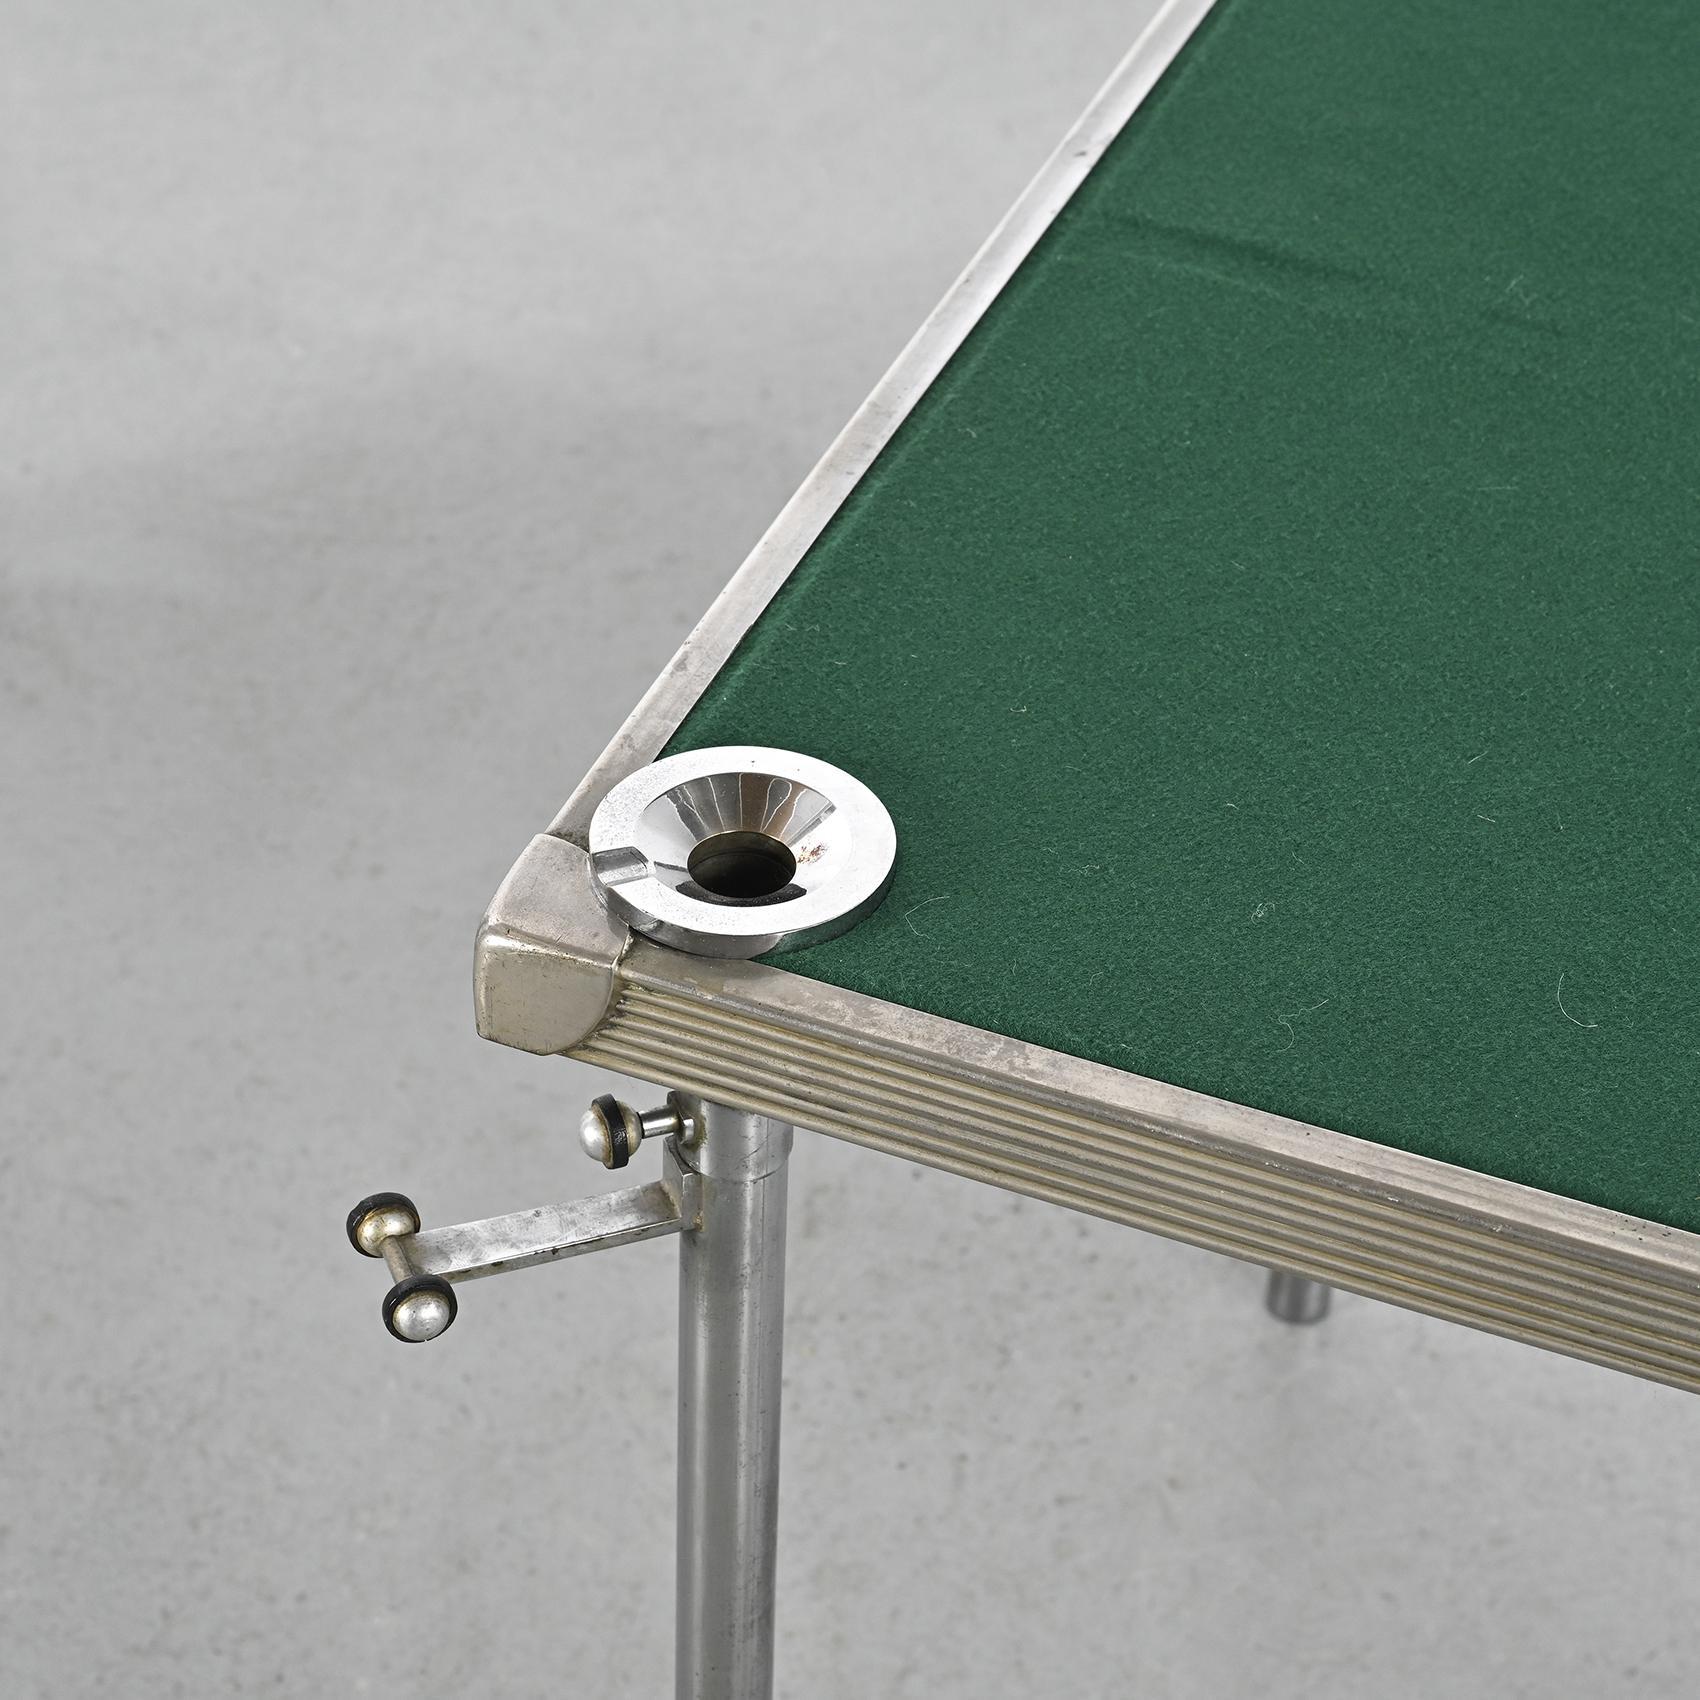 Step back into the 1940s with this sophisticated game table in chrome-plated metal, attributed to Jean-Boris LACROIX.

The removable tubular base seamlessly tucks away beneath the tabletop, offering practical functionality. The table is